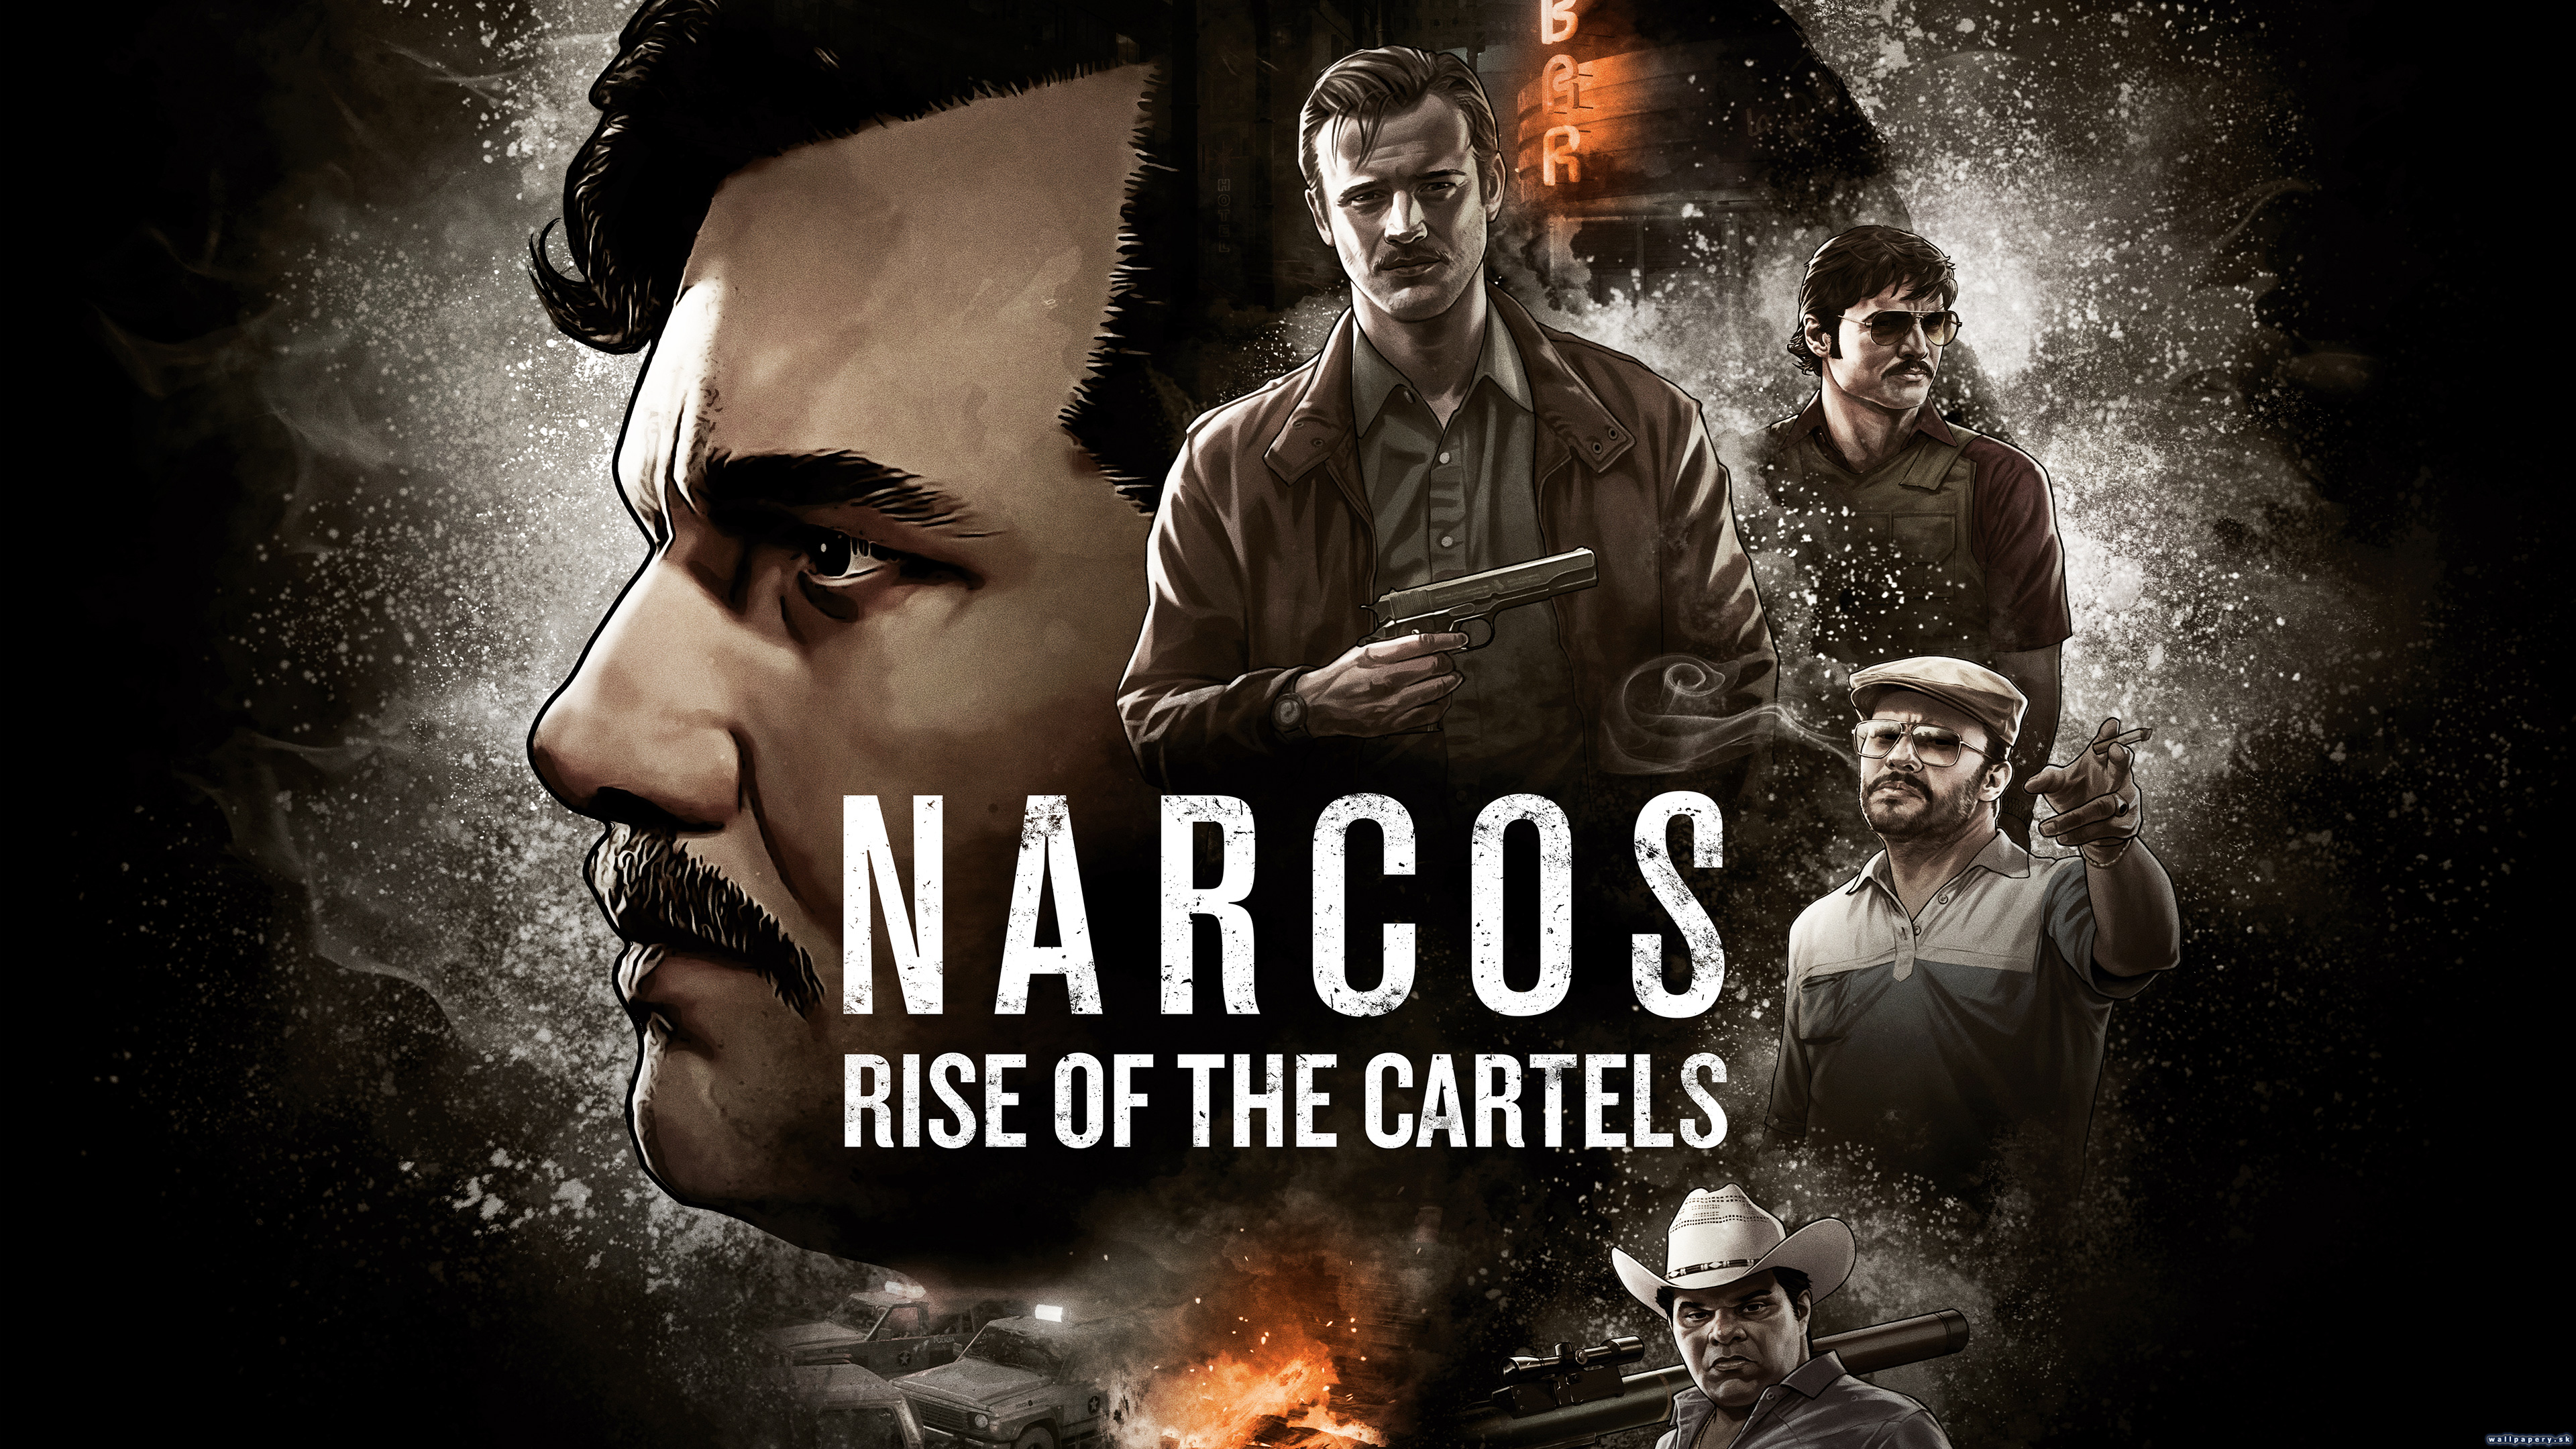 Narcos: Rise of the Cartels - wallpaper 2